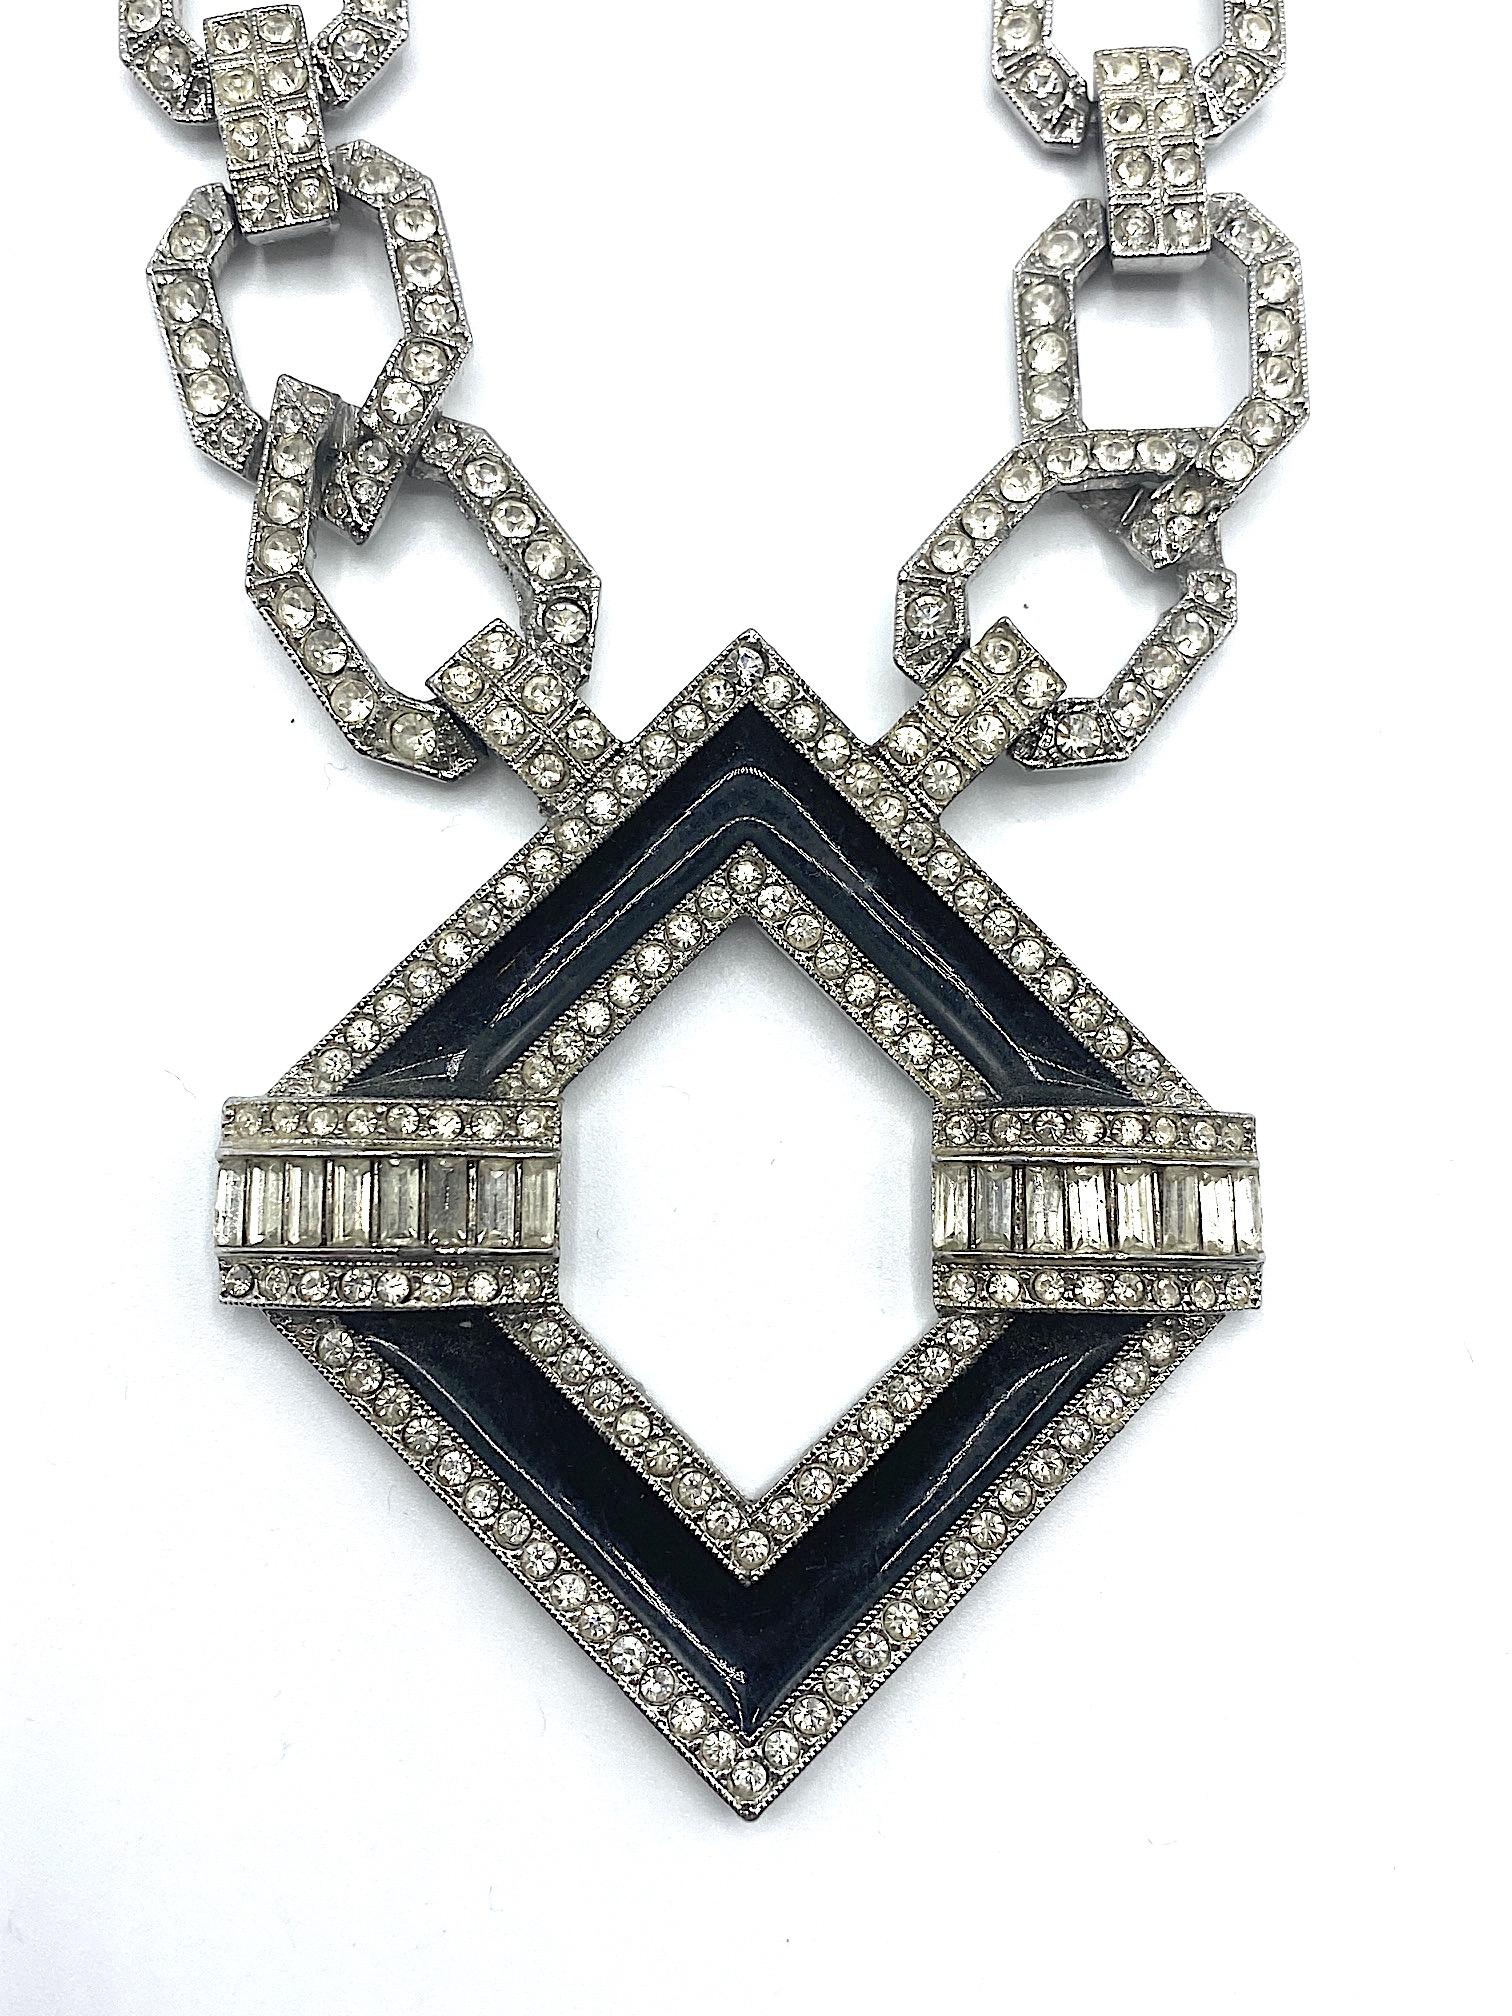 Kenneth Jay Lane 1980s Art Deco Revival Necklace 8